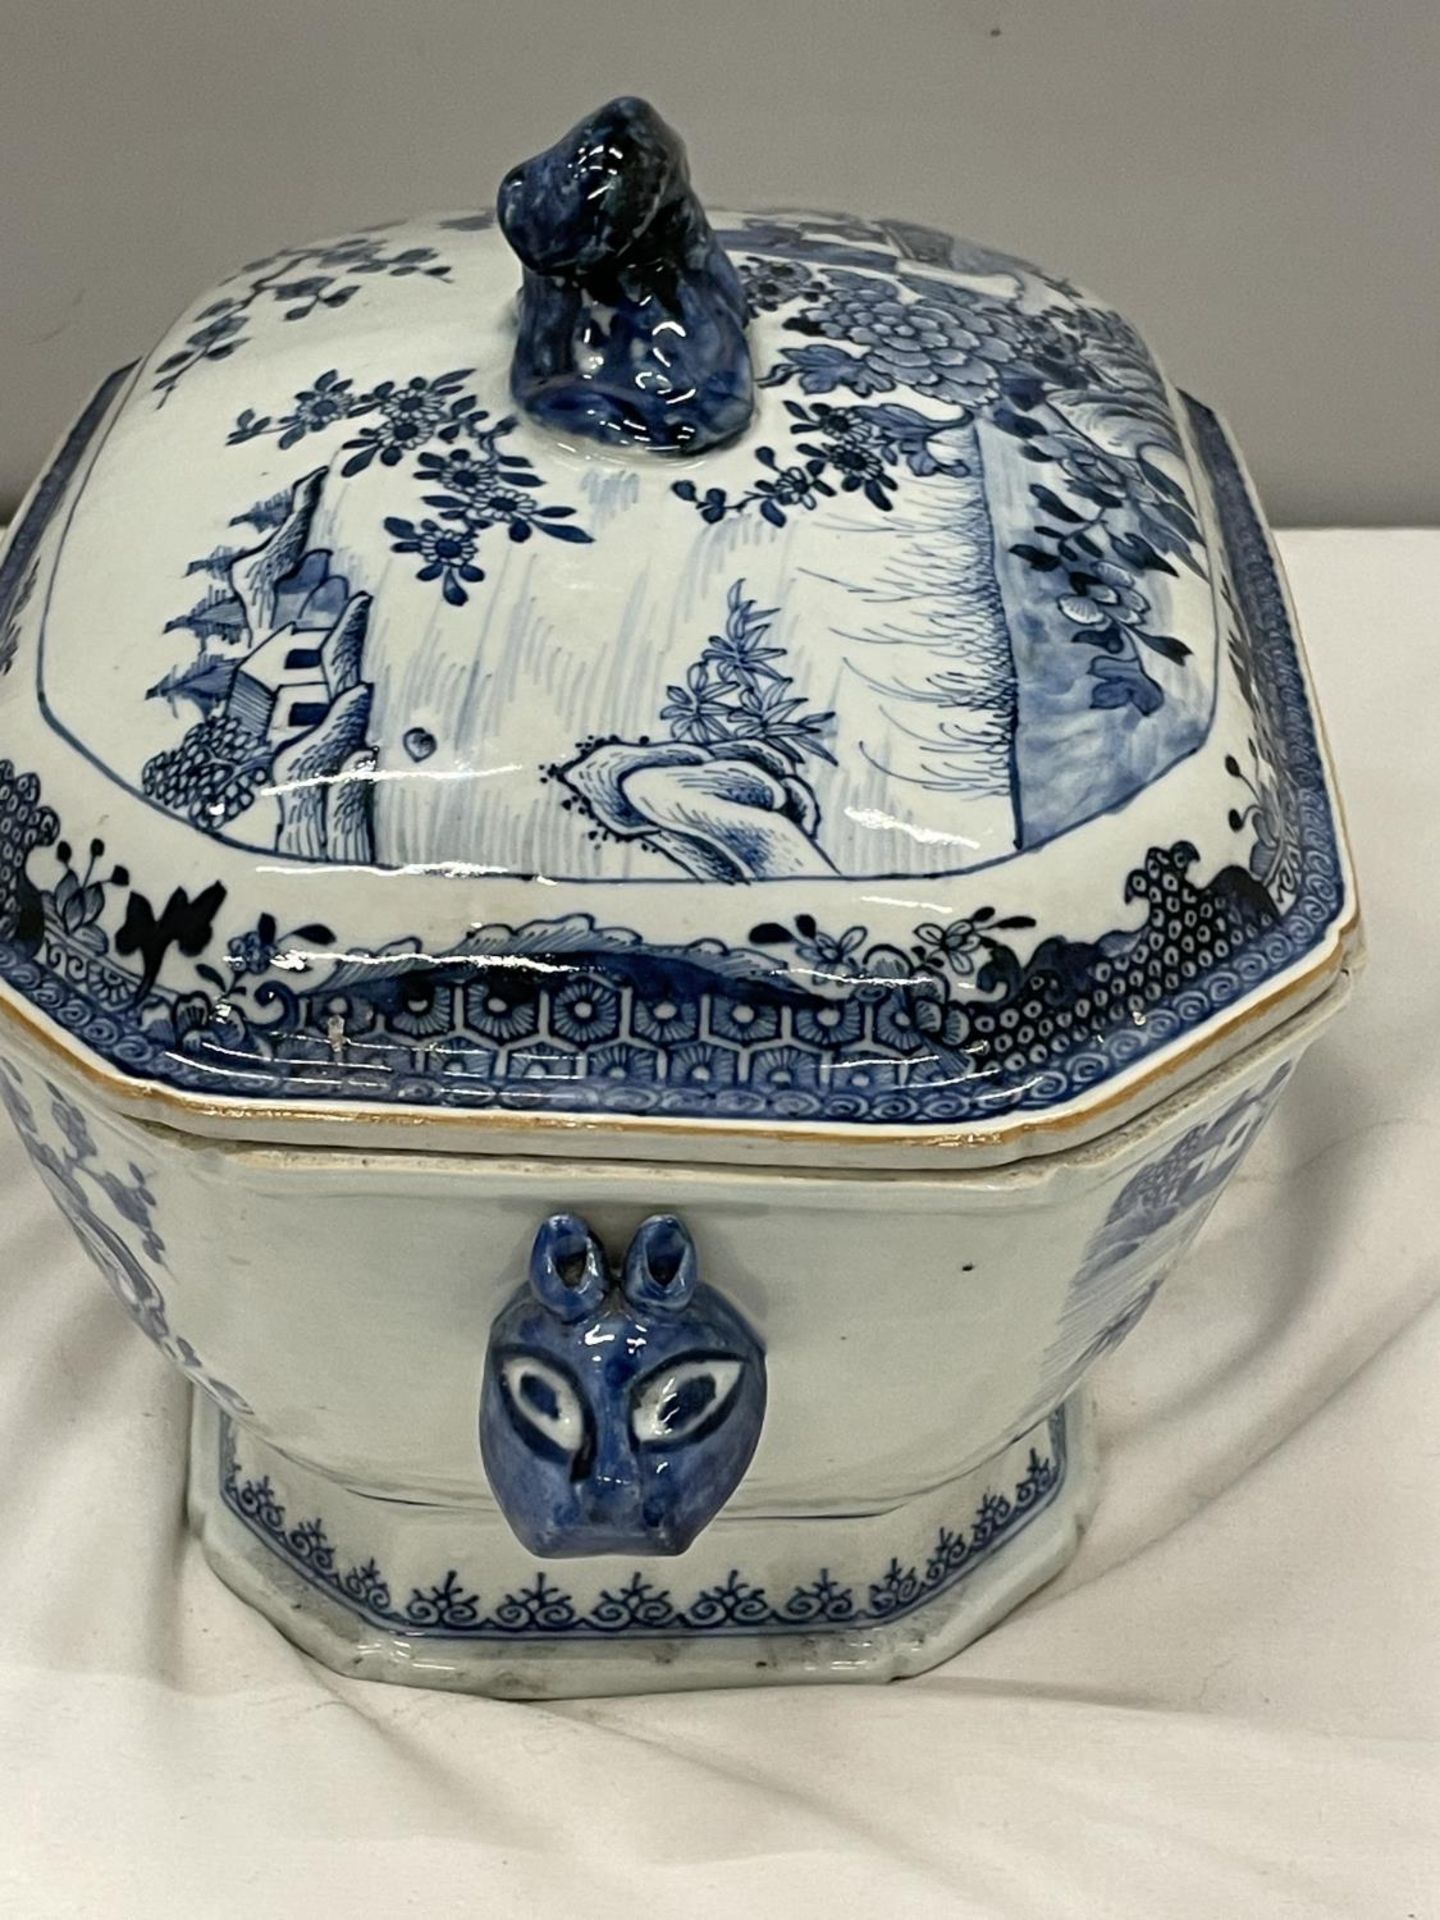 A BELIEVED TO BE LATE 18TH/EARLY 19TH CENTURY CHINESE QING DYNASTY/NANKIN BLUE AND WHITE LARGE - Image 7 of 9